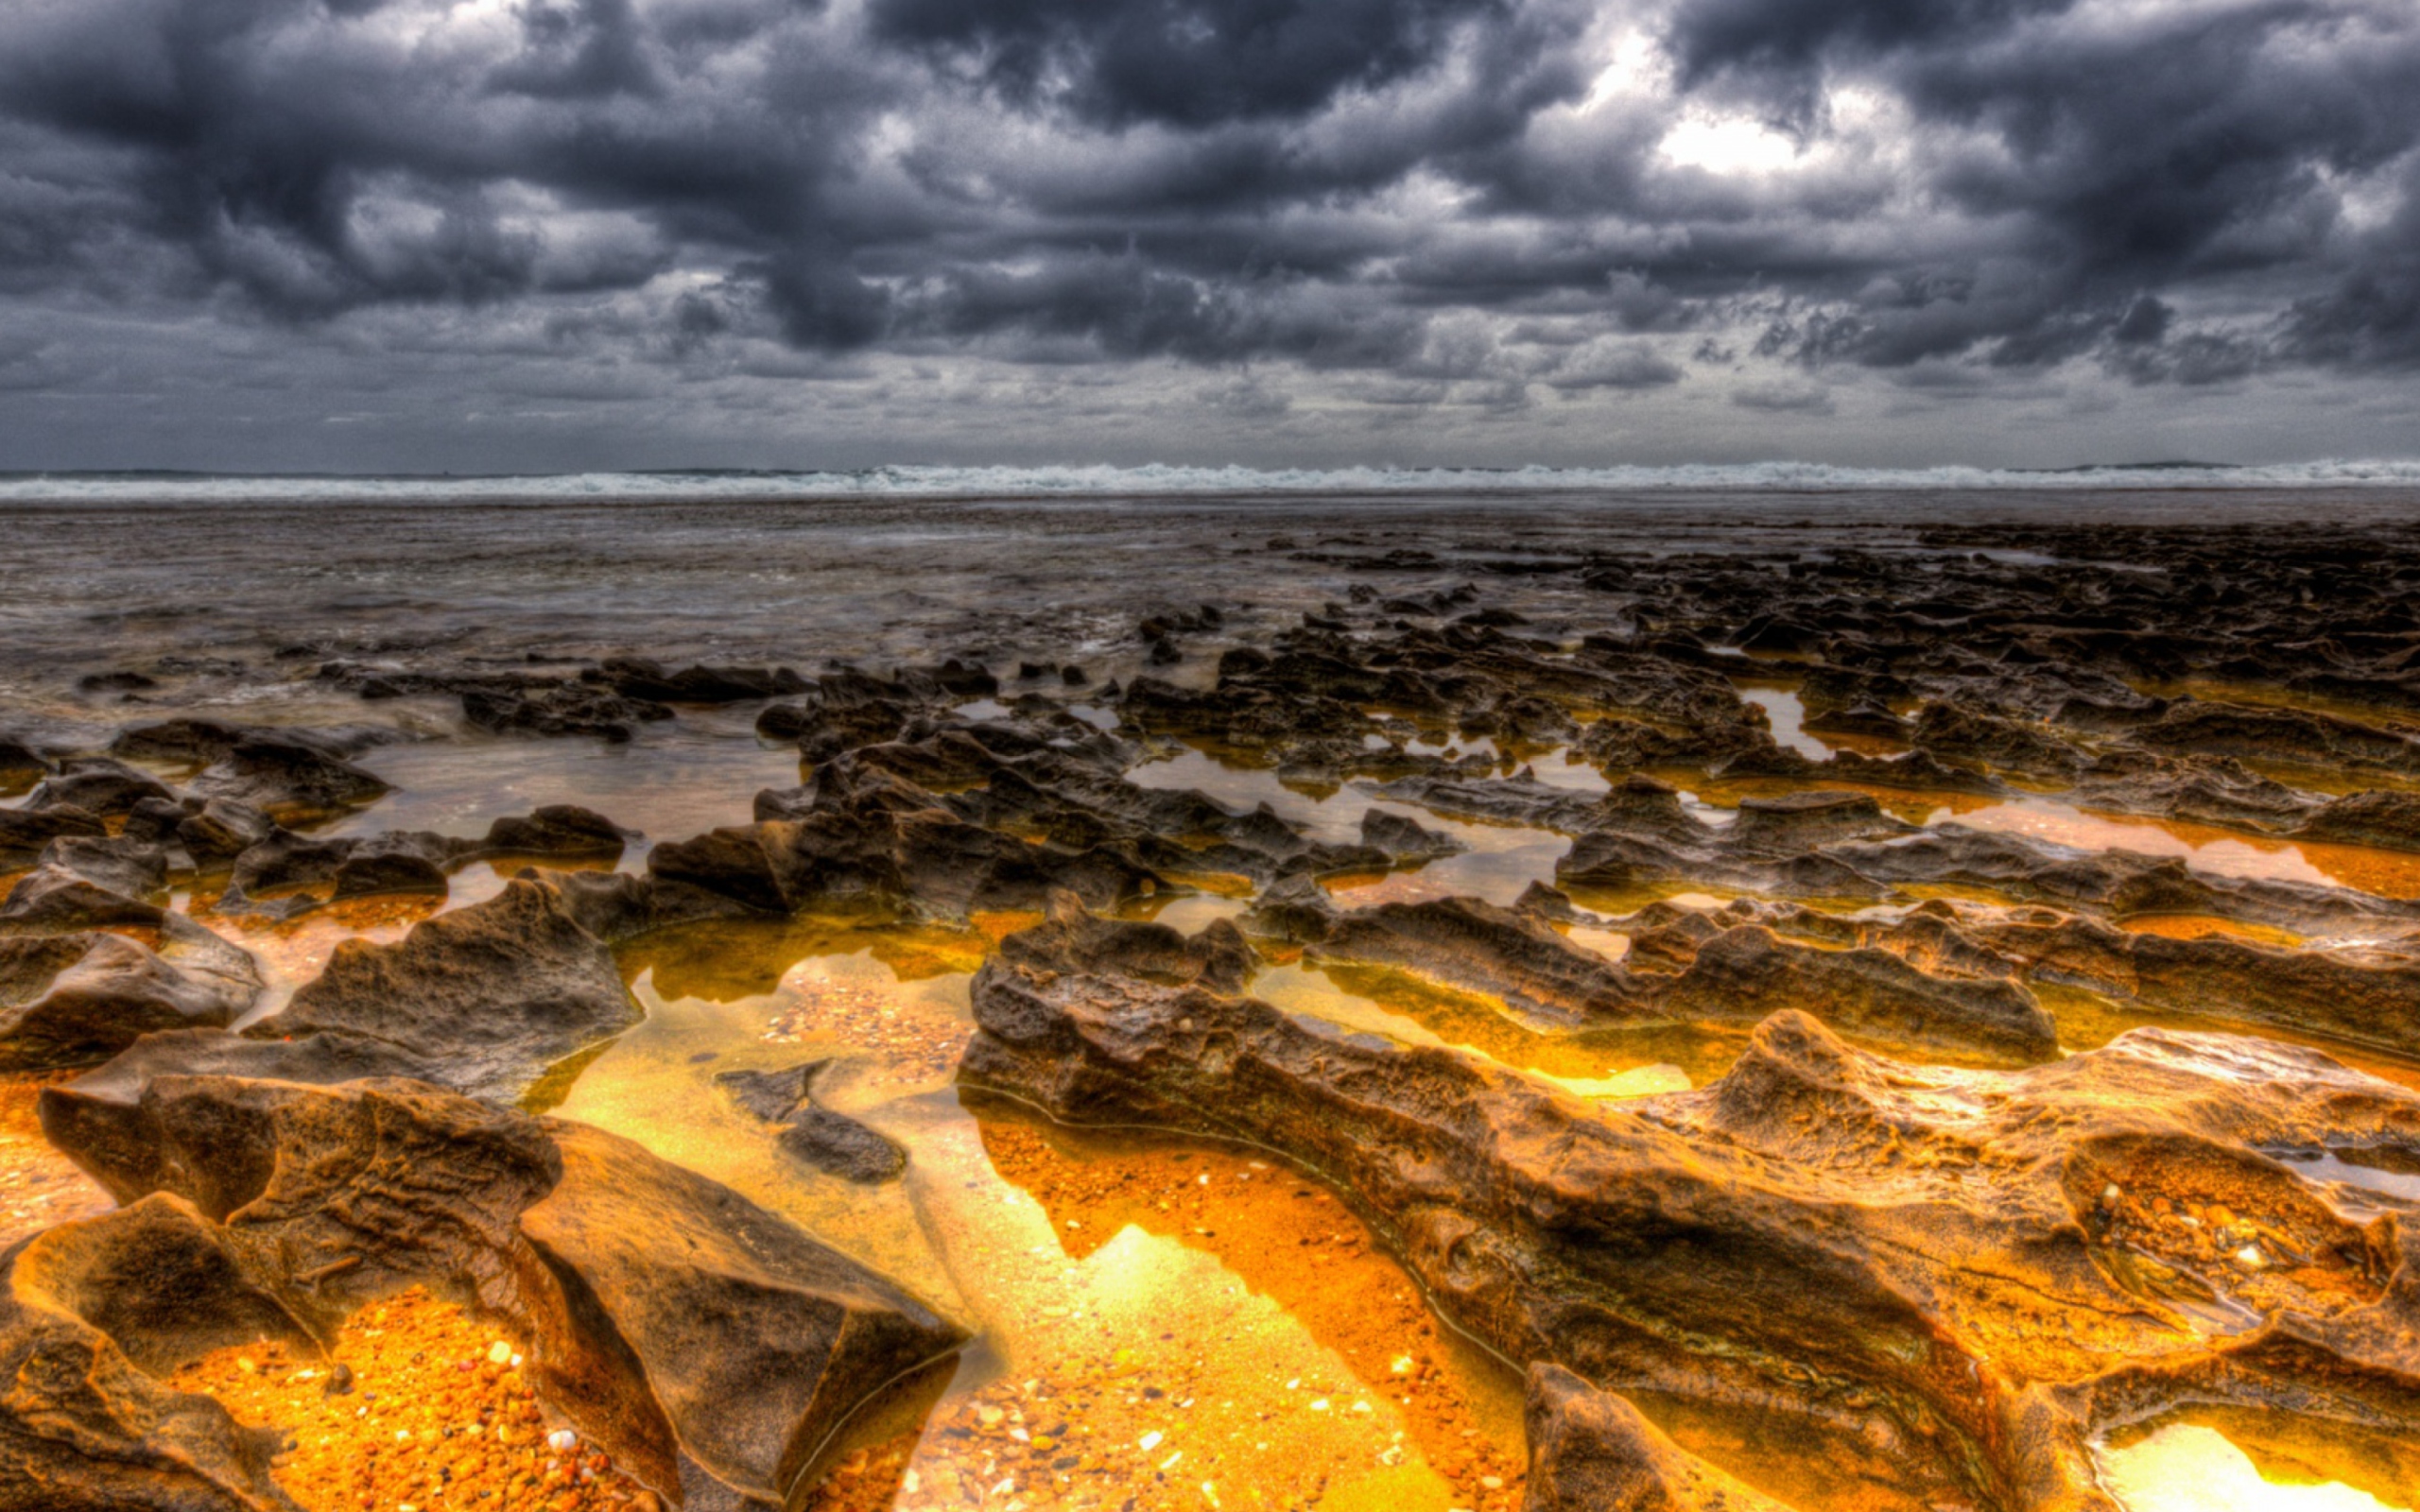 Hdr Dark Clouds And Gold Sand wallpaper 2560x1600